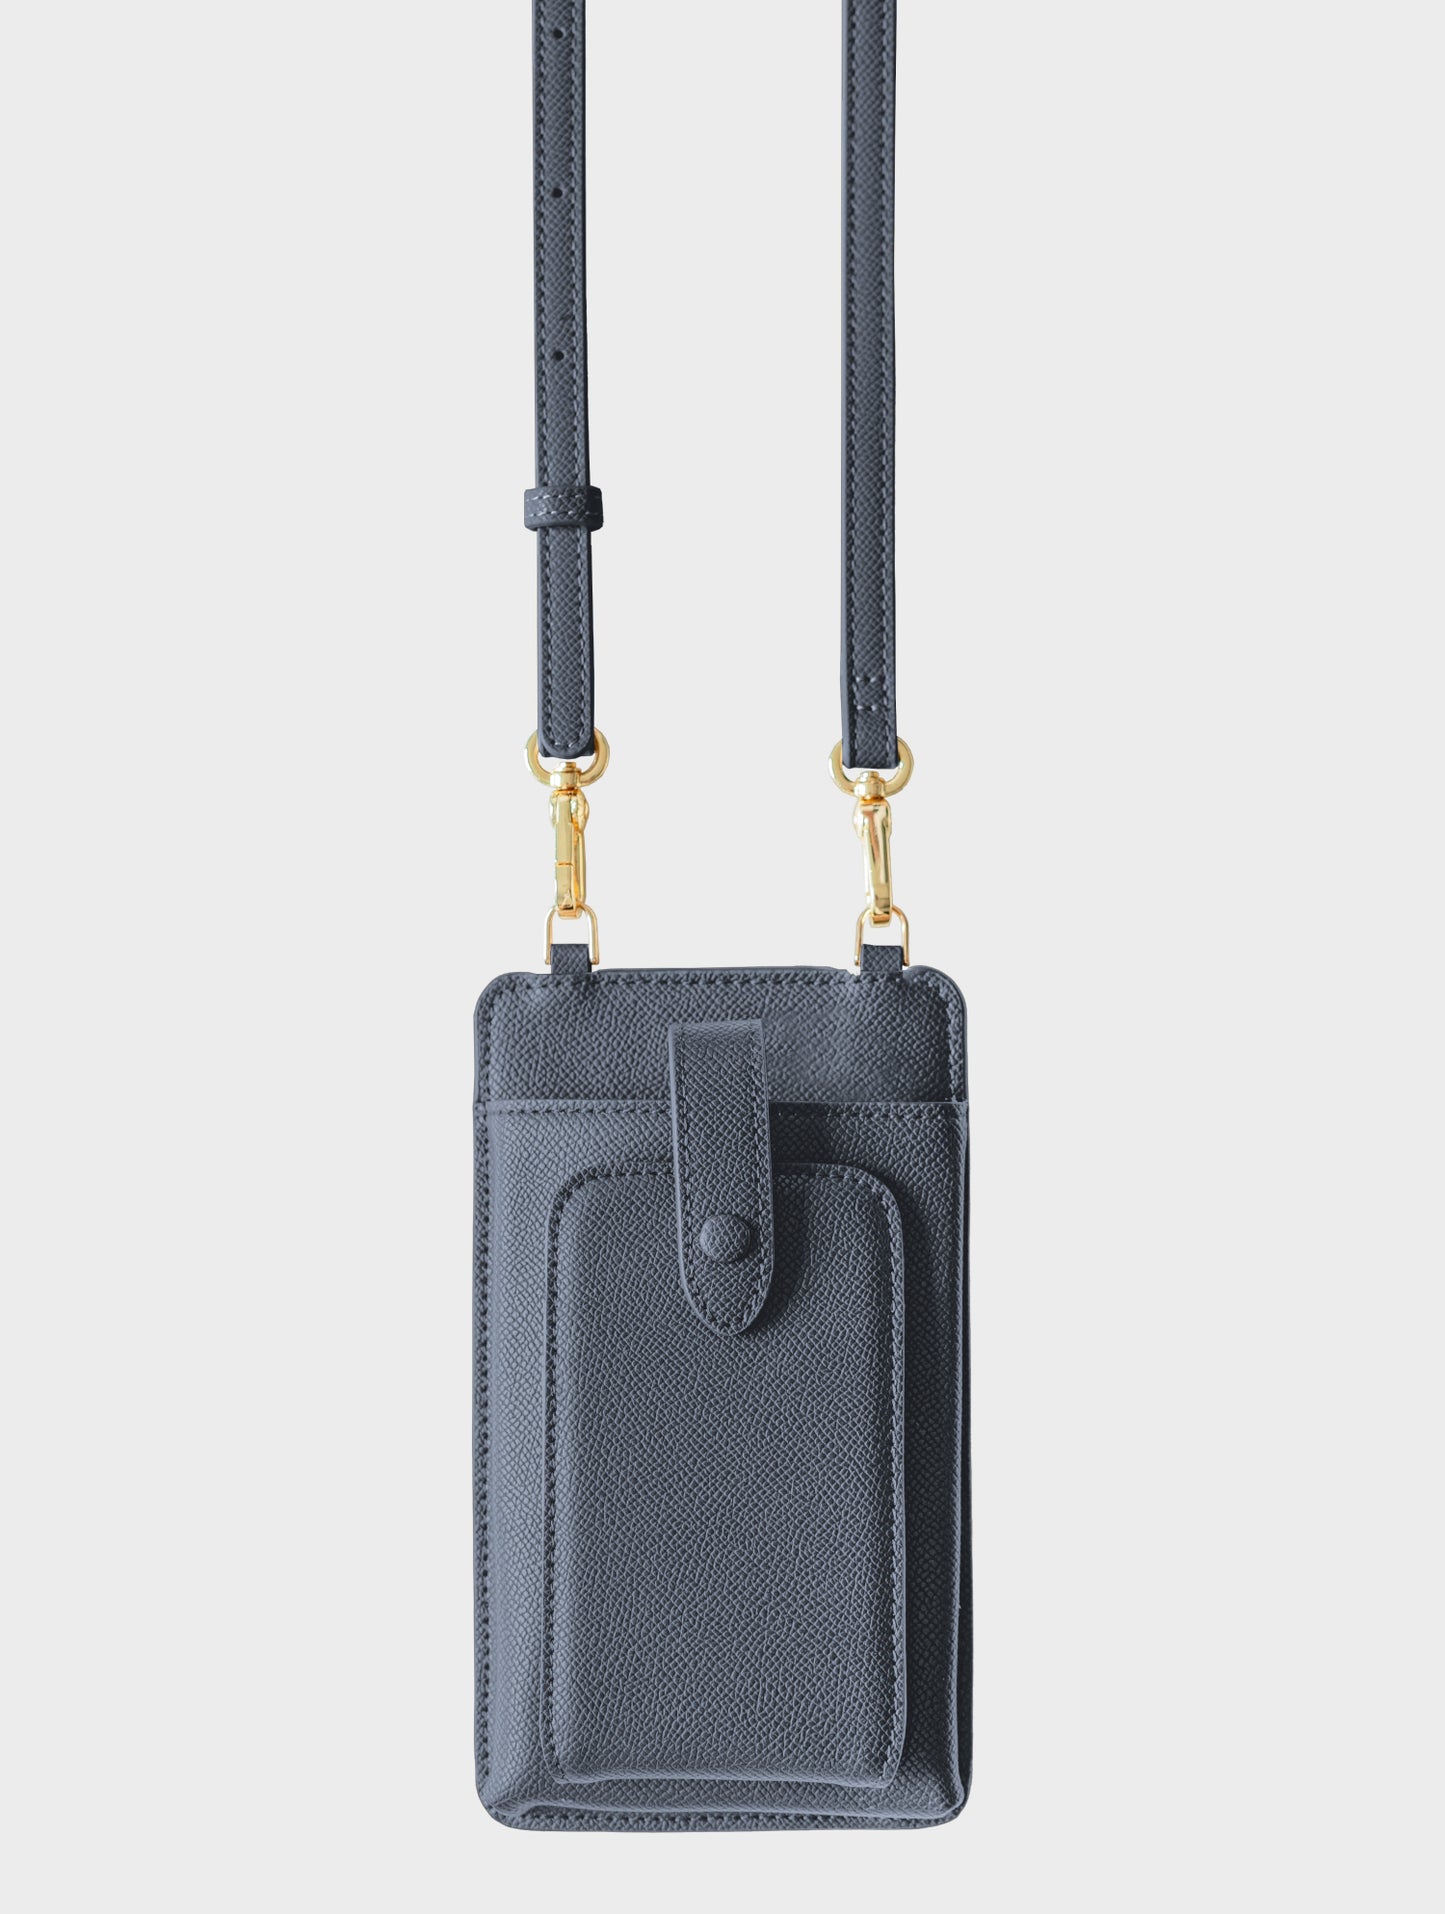 ATHENA PHONE BAG IN MIDNIGHT